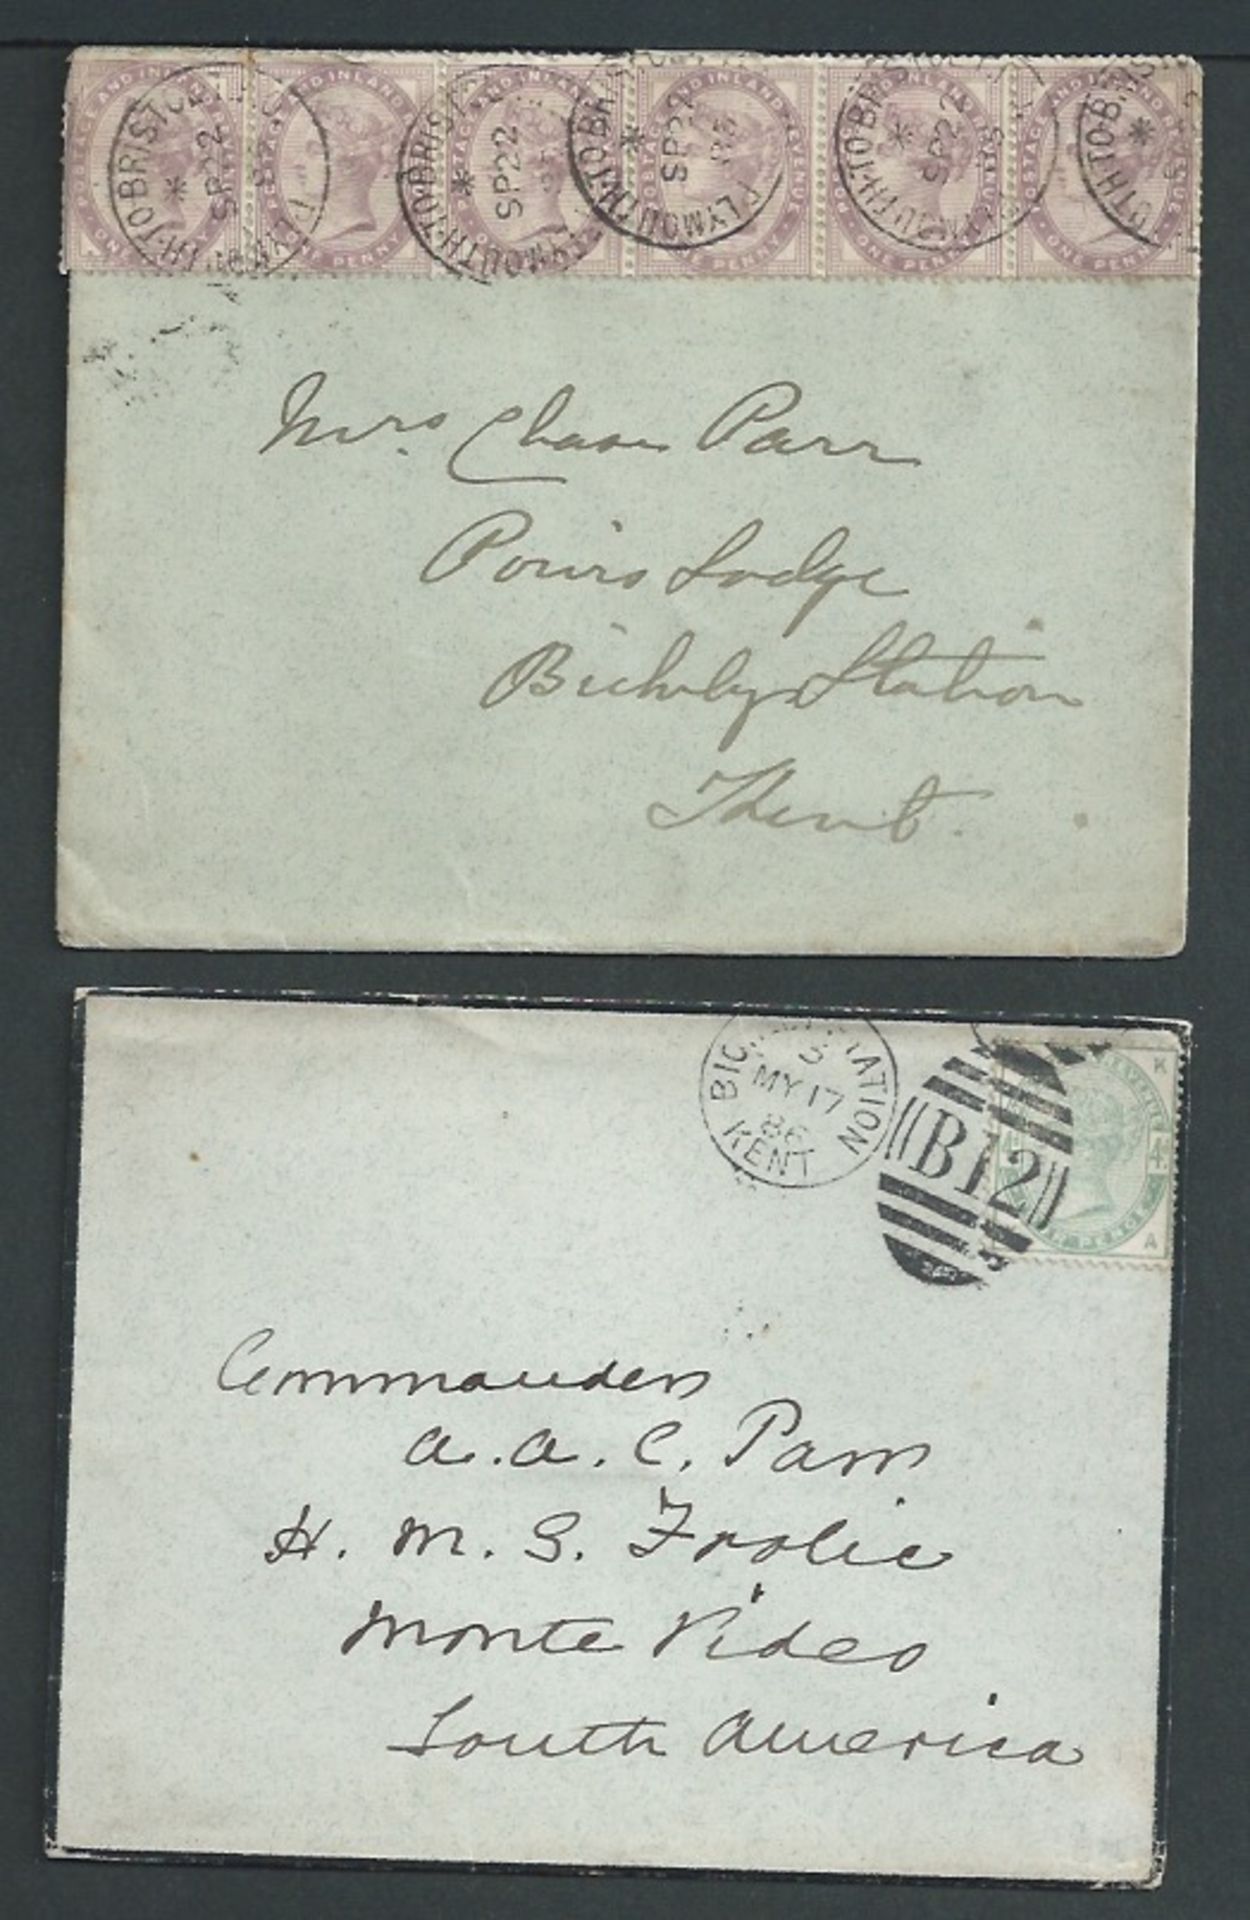 G.B. - Naval Mail / T.P.O.s / Railways 1885-86 Cover from Commander Parr serving on H.M.S. Frolic i